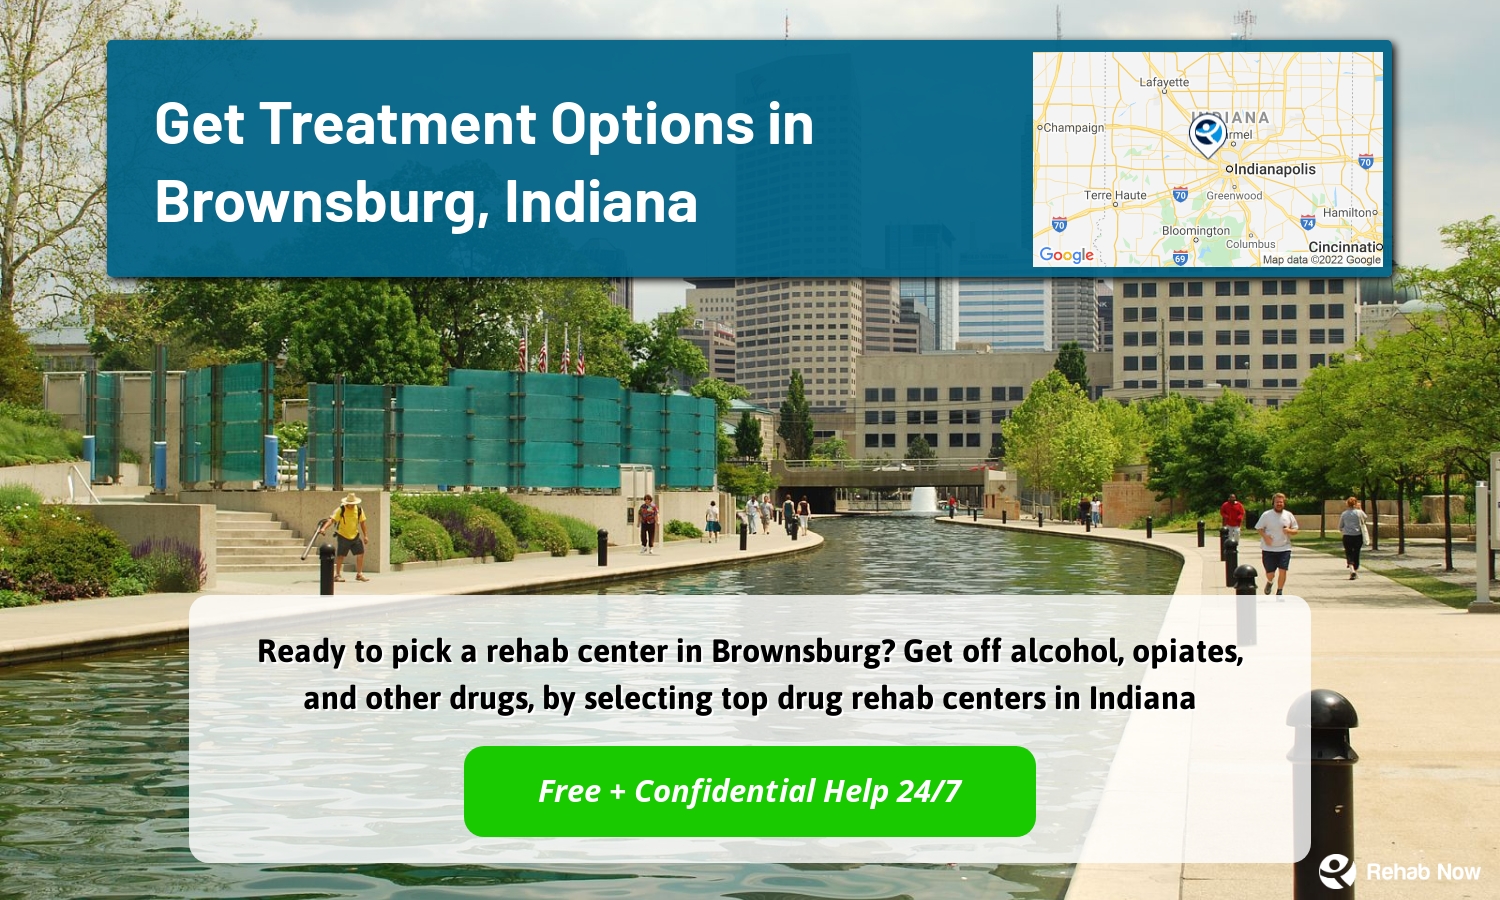 Ready to pick a rehab center in Brownsburg? Get off alcohol, opiates, and other drugs, by selecting top drug rehab centers in Indiana